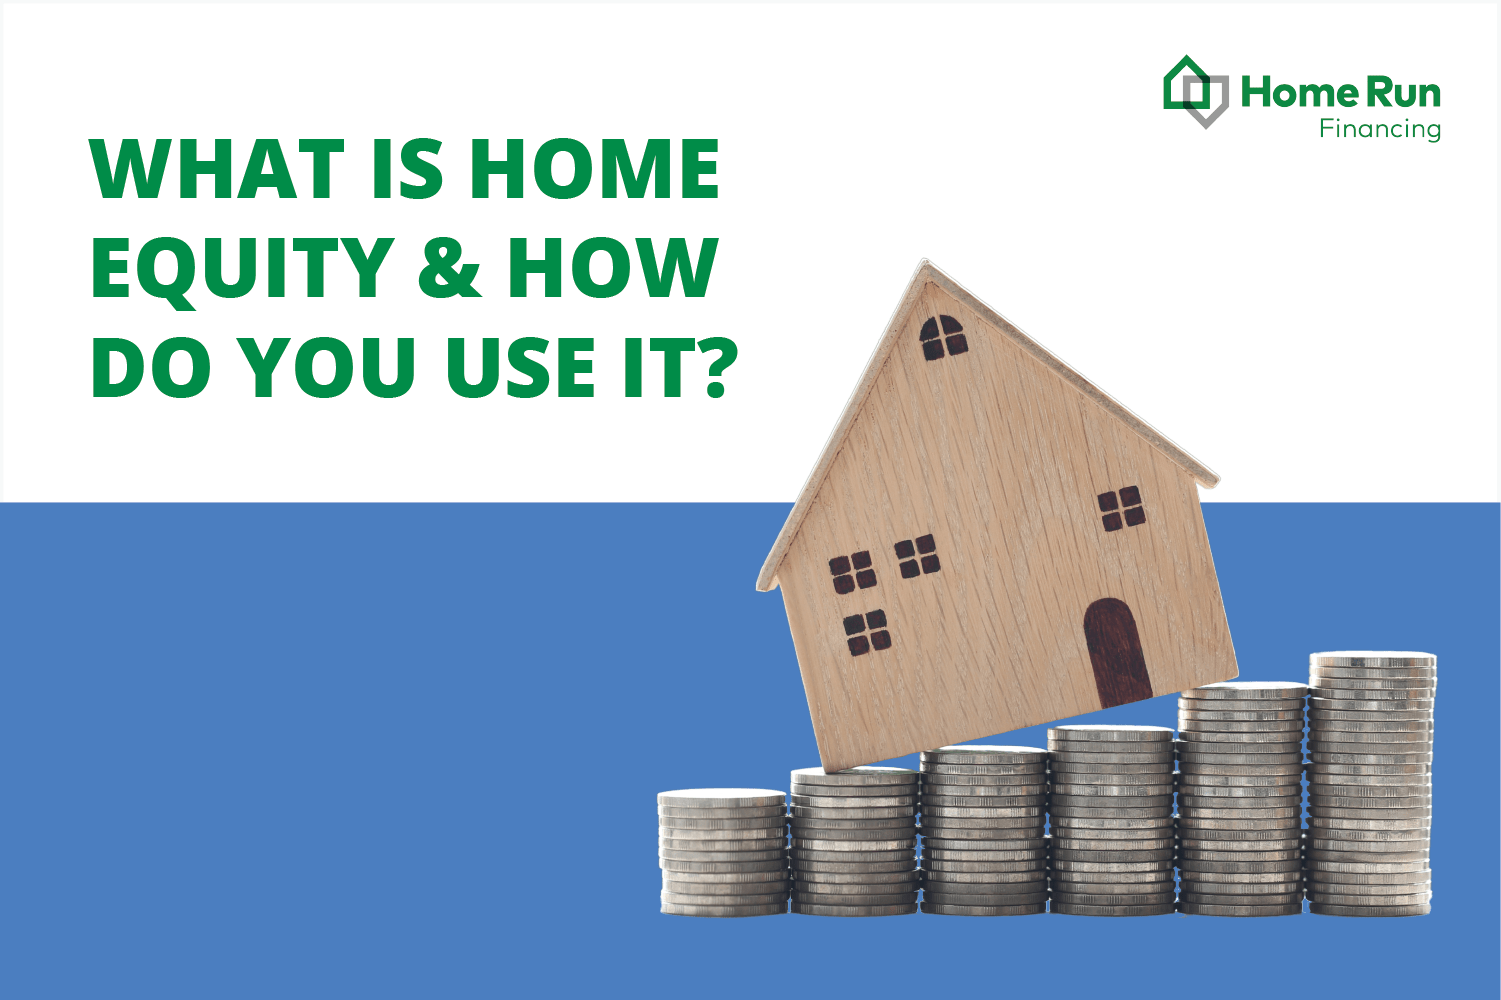 What is home equity and how do you use it?